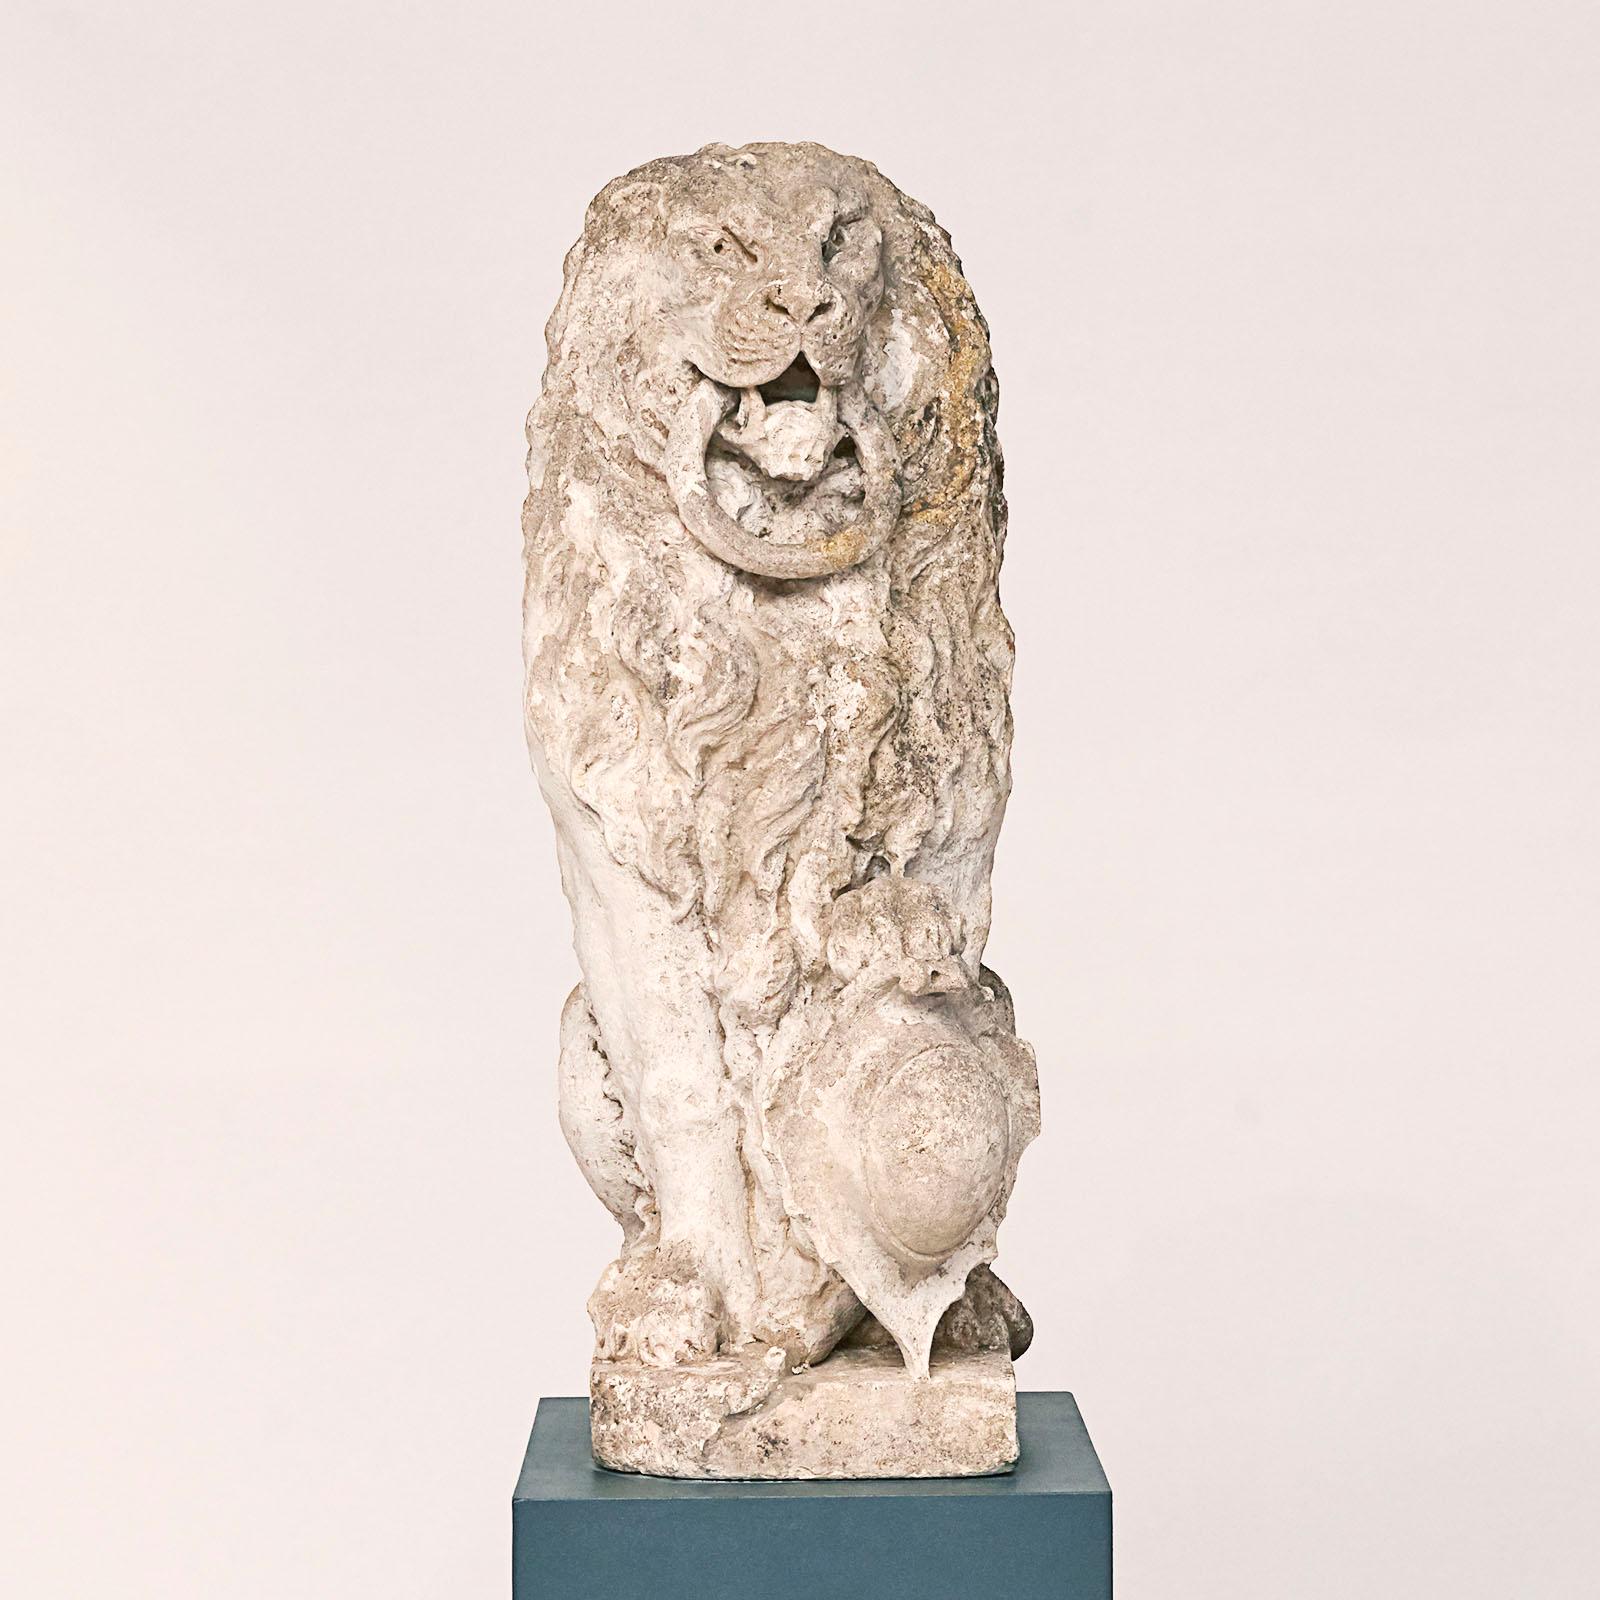 French carved seated lion with a ring in his mouth, carved French limestone, circa 1700s.

Provenance: The Danish author Karen Branson 1875-1936, One of two carved loins that flanked the main entrance the house called Solgården, located close to